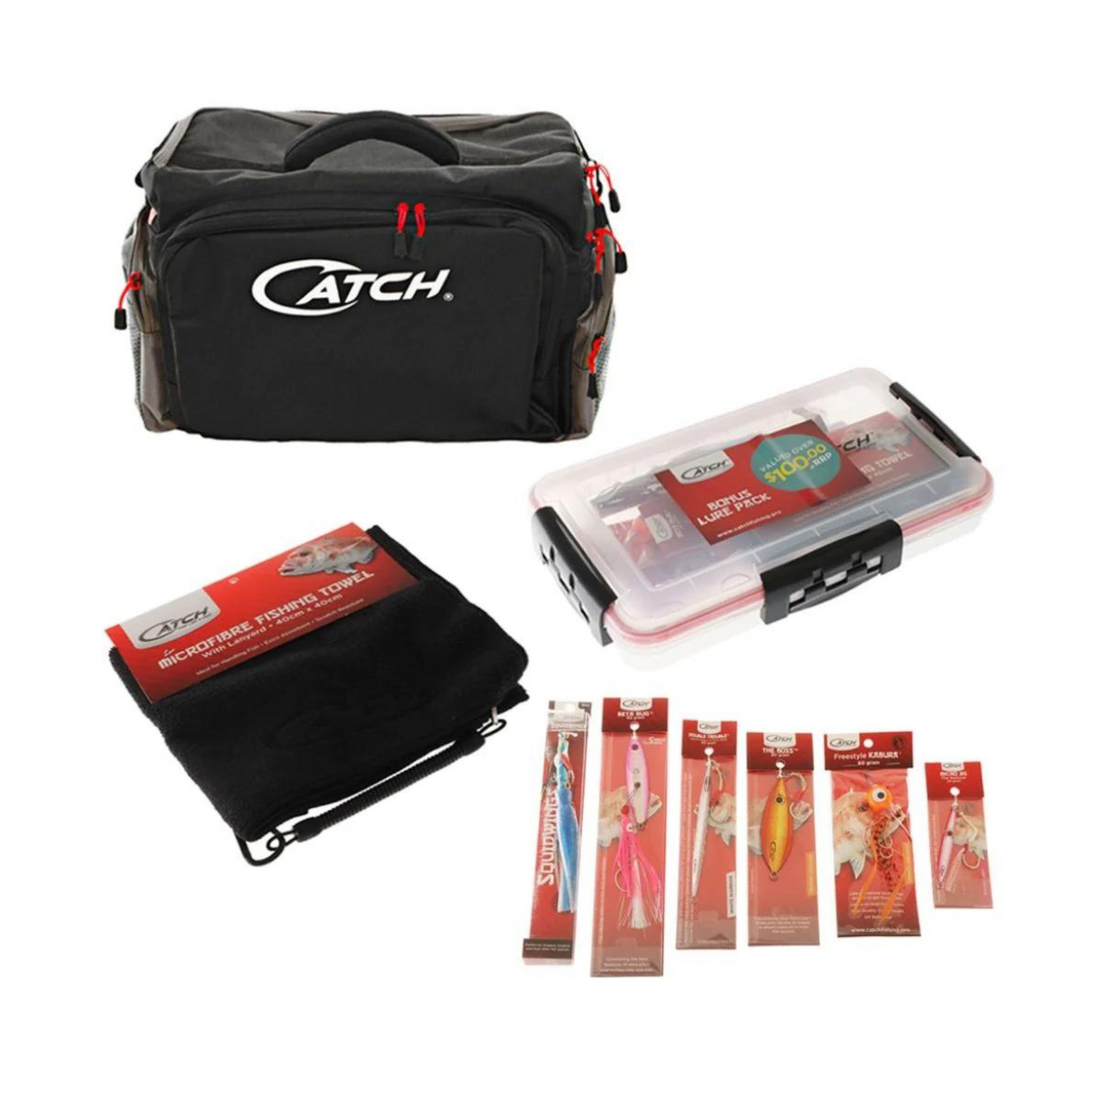 CATCH 5 COMPARTMENT TACKLE BAG W COOLER COMPARTMENT INCLUDING TACKLE VALUE PACK